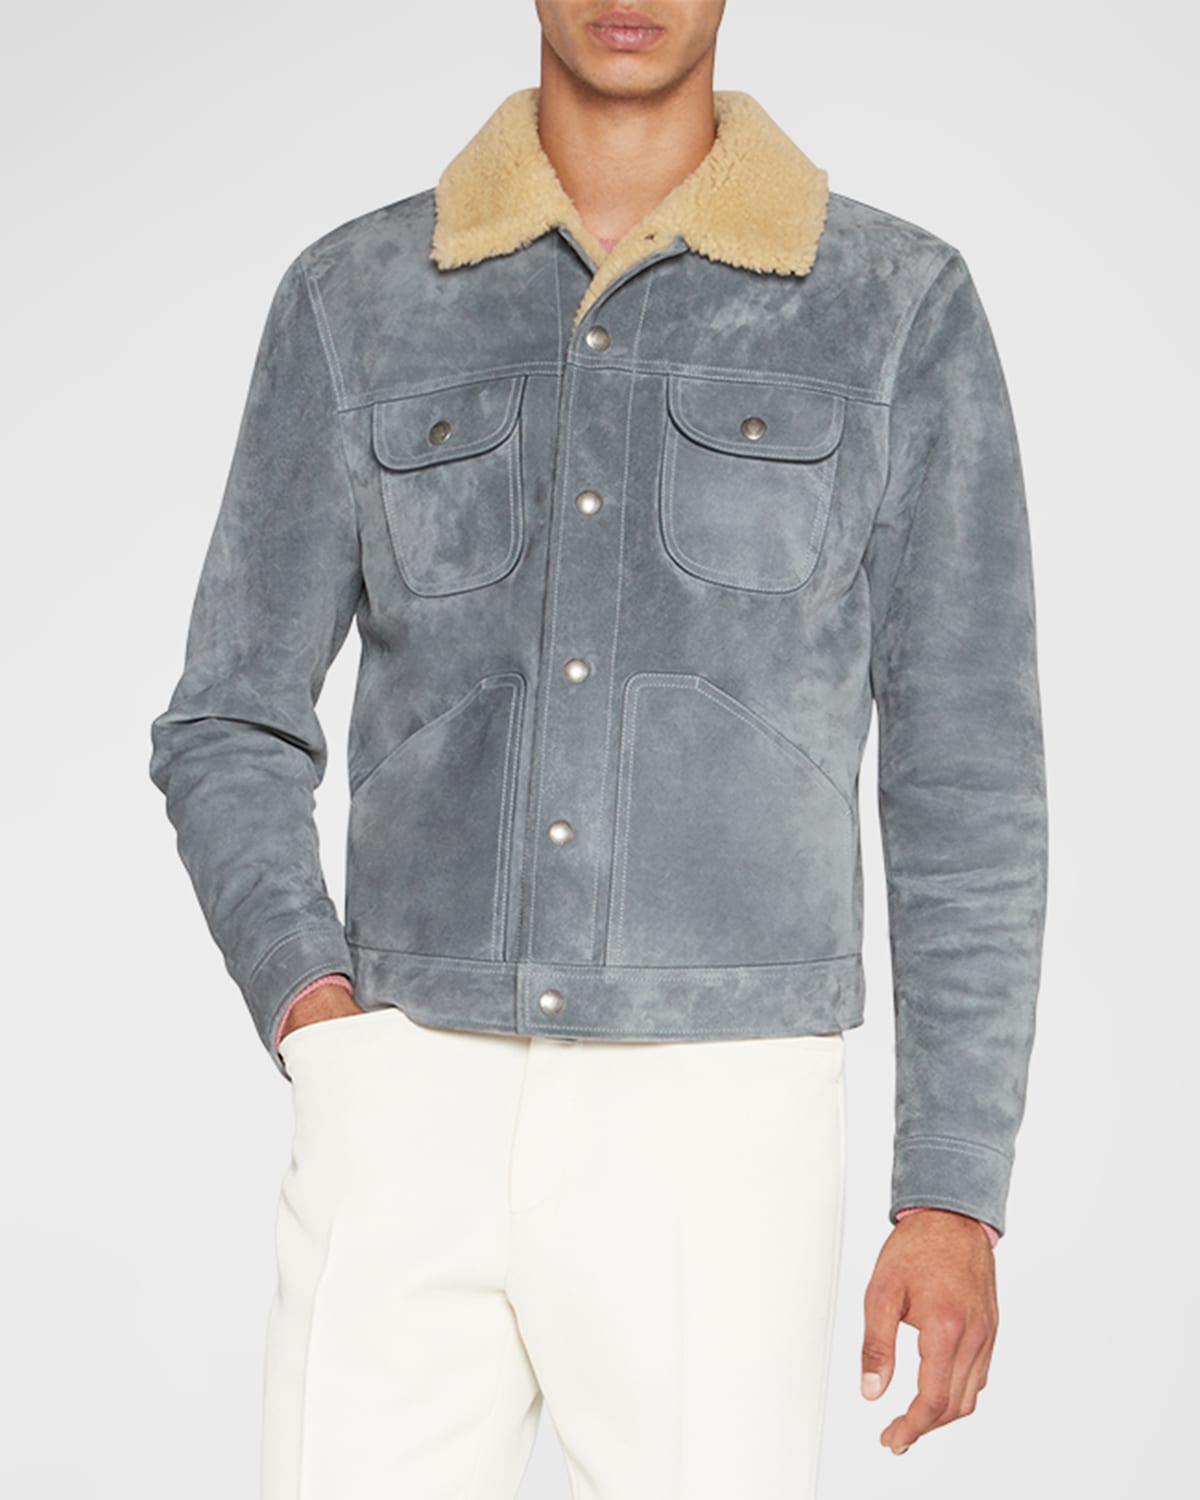 Men's Suede Trucker Jacket with Shearling Trim